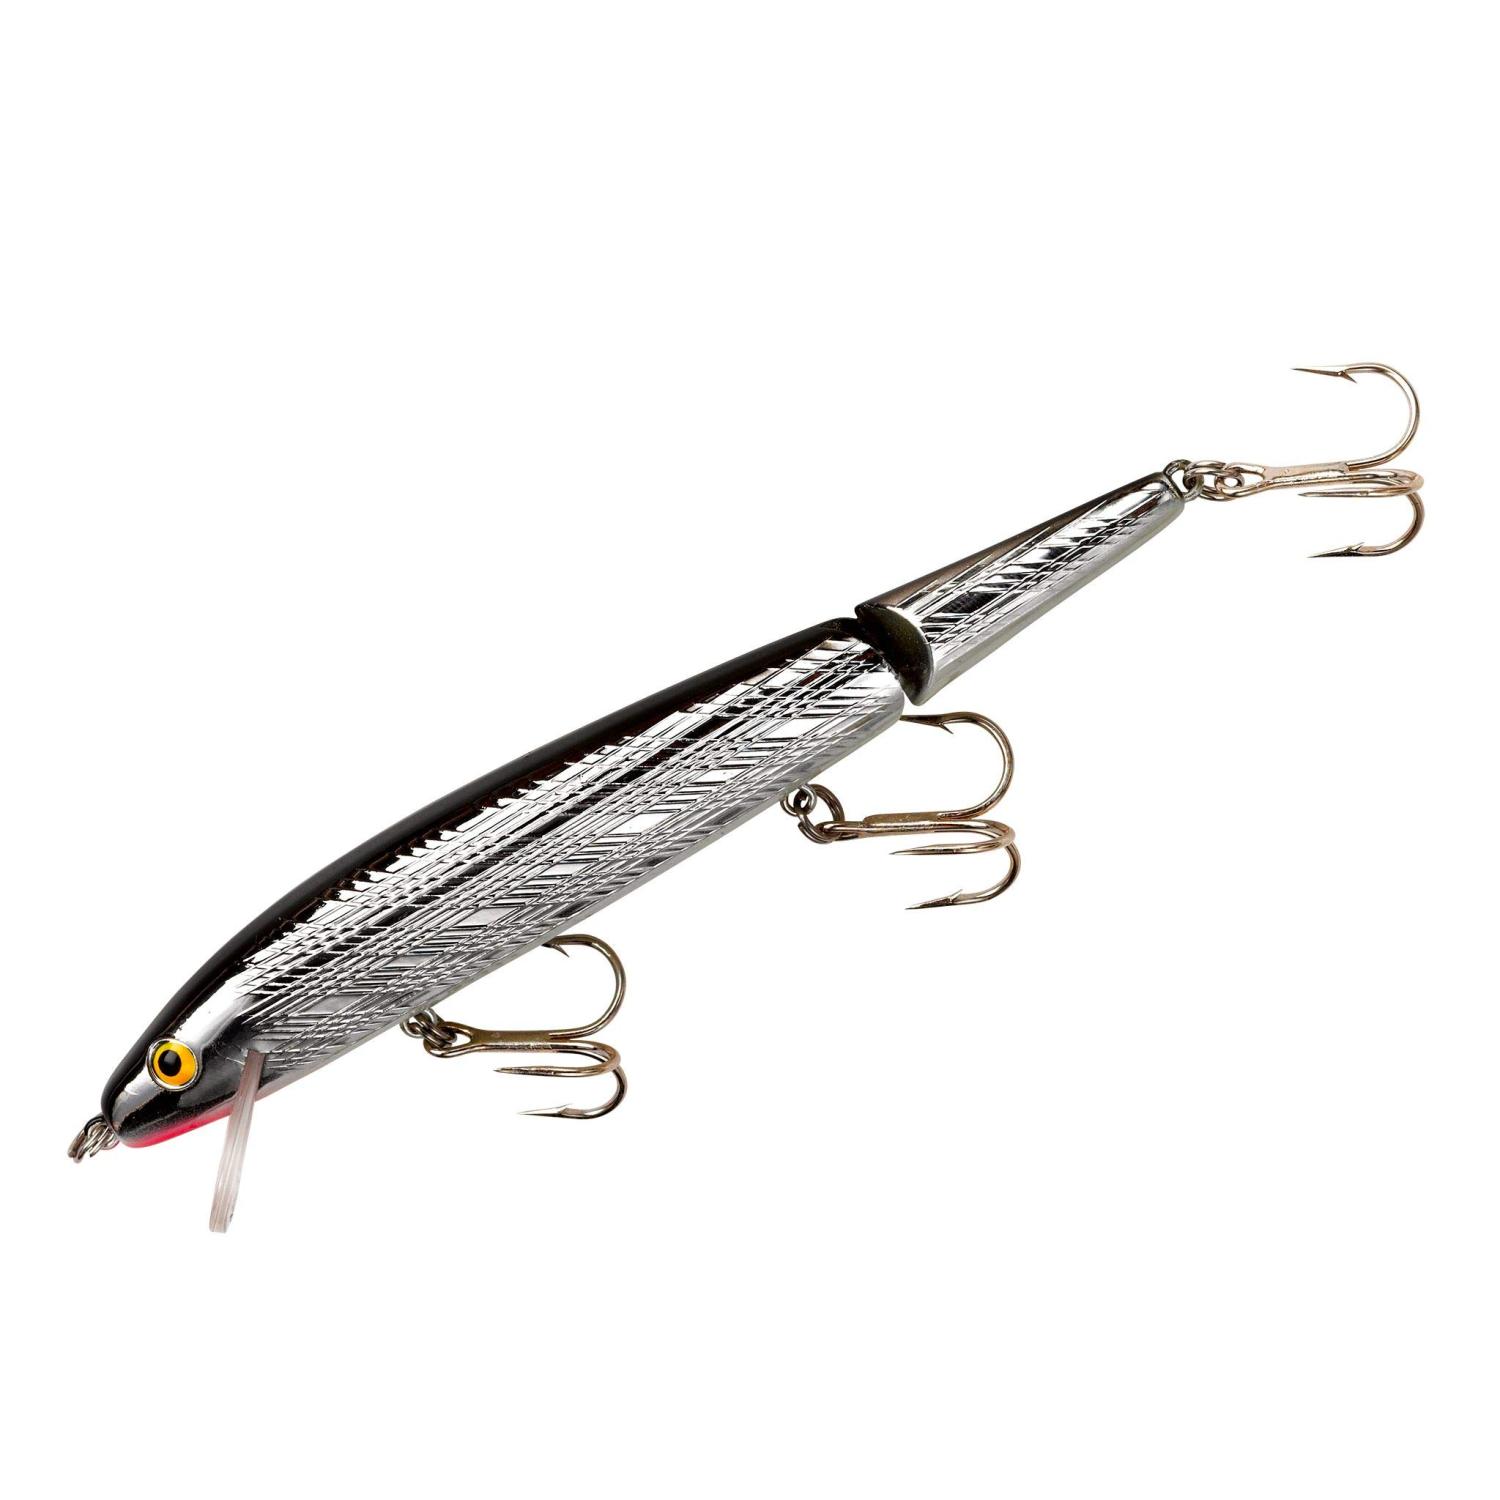 Rebel Lures Jointed Minnow Crankbait Fishing Lure 1 7/8 in, 3/32 oz Silver/ Black